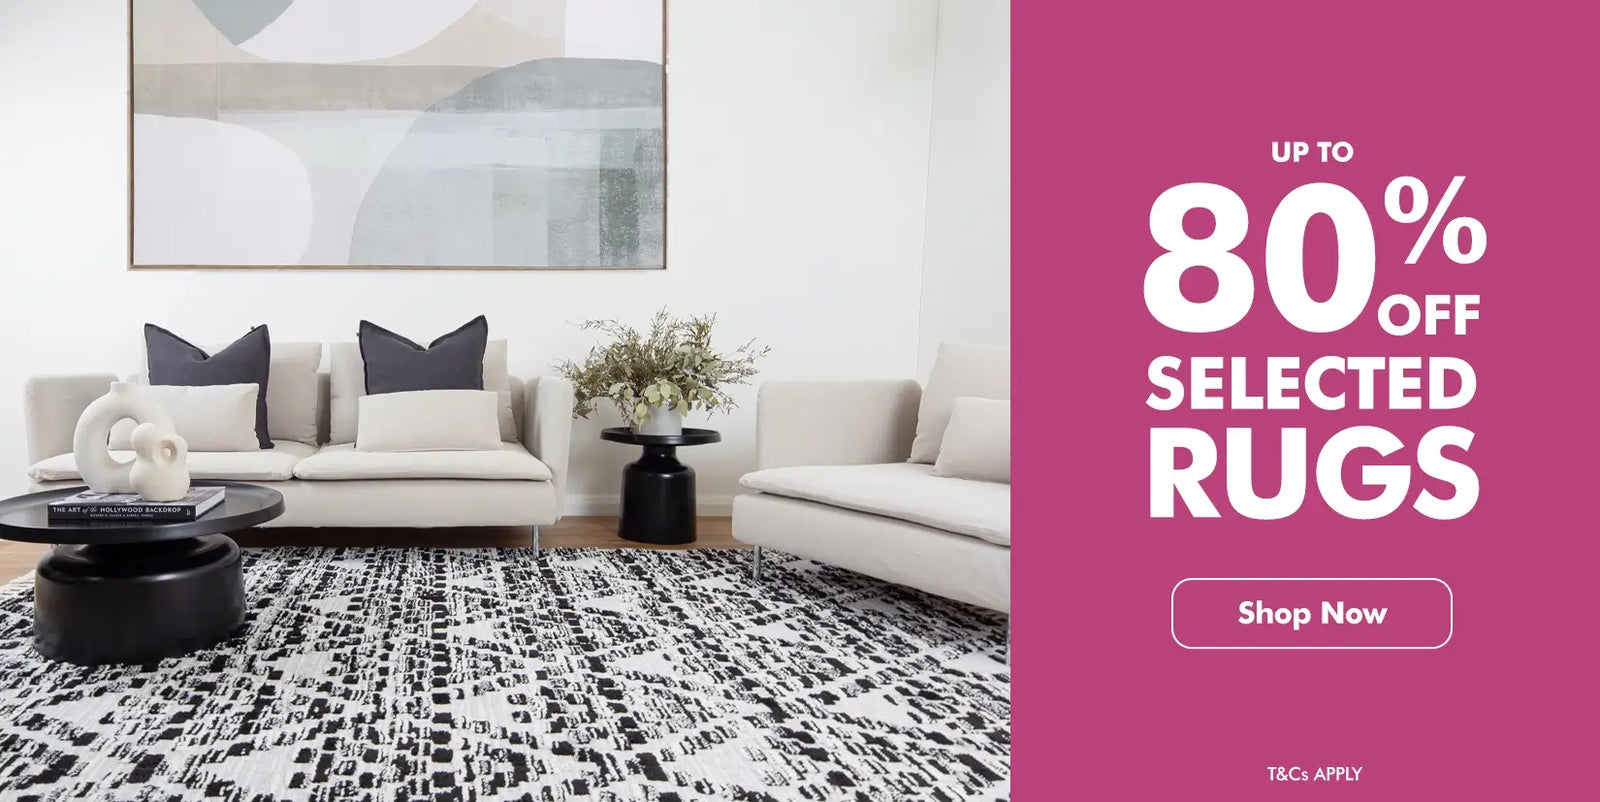 80 off promotion by rugs a million.